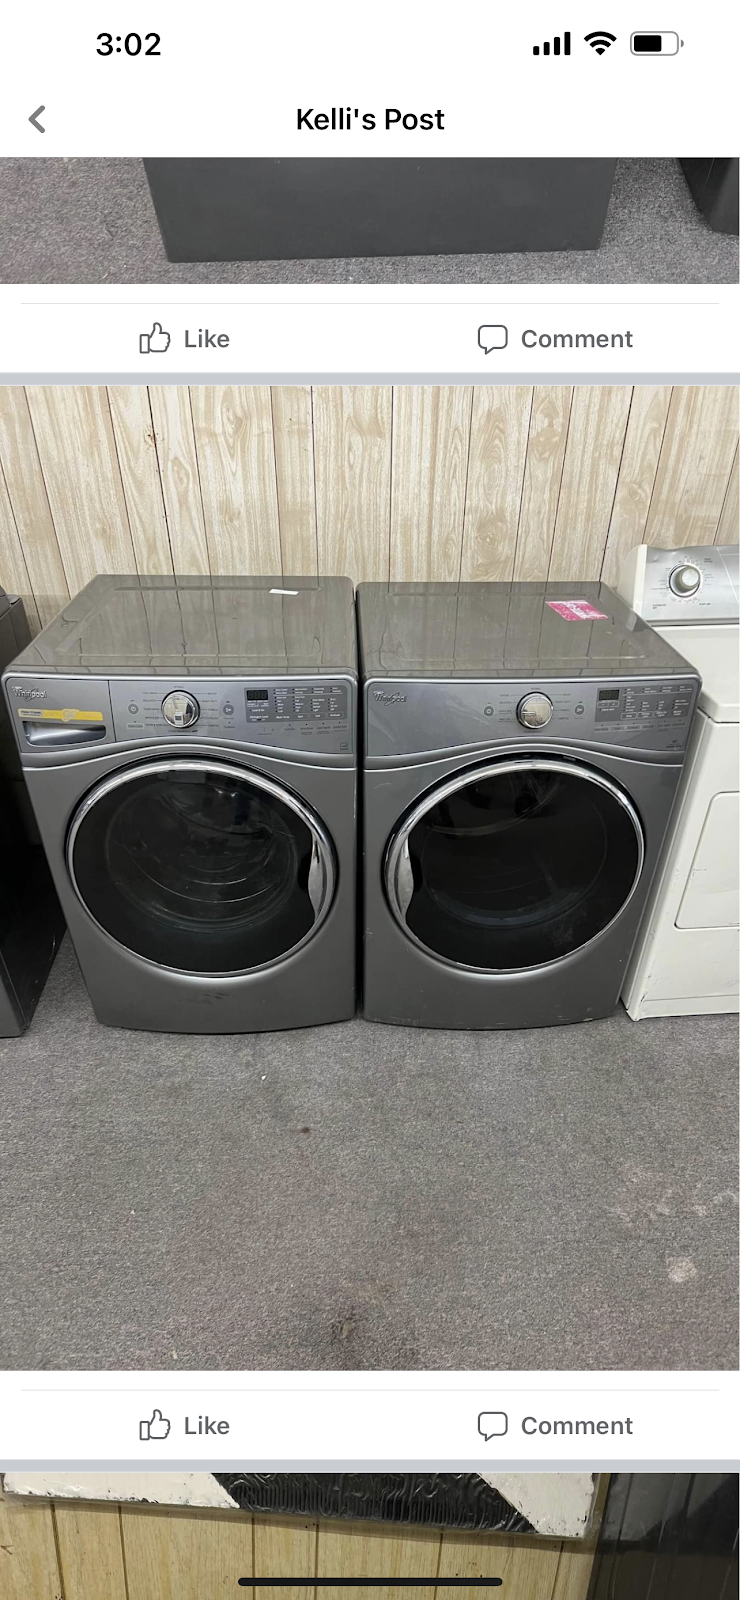 Appliances and More | 250 Broad St, Elyria, OH 44035, USA | Phone: (440) 406-8600